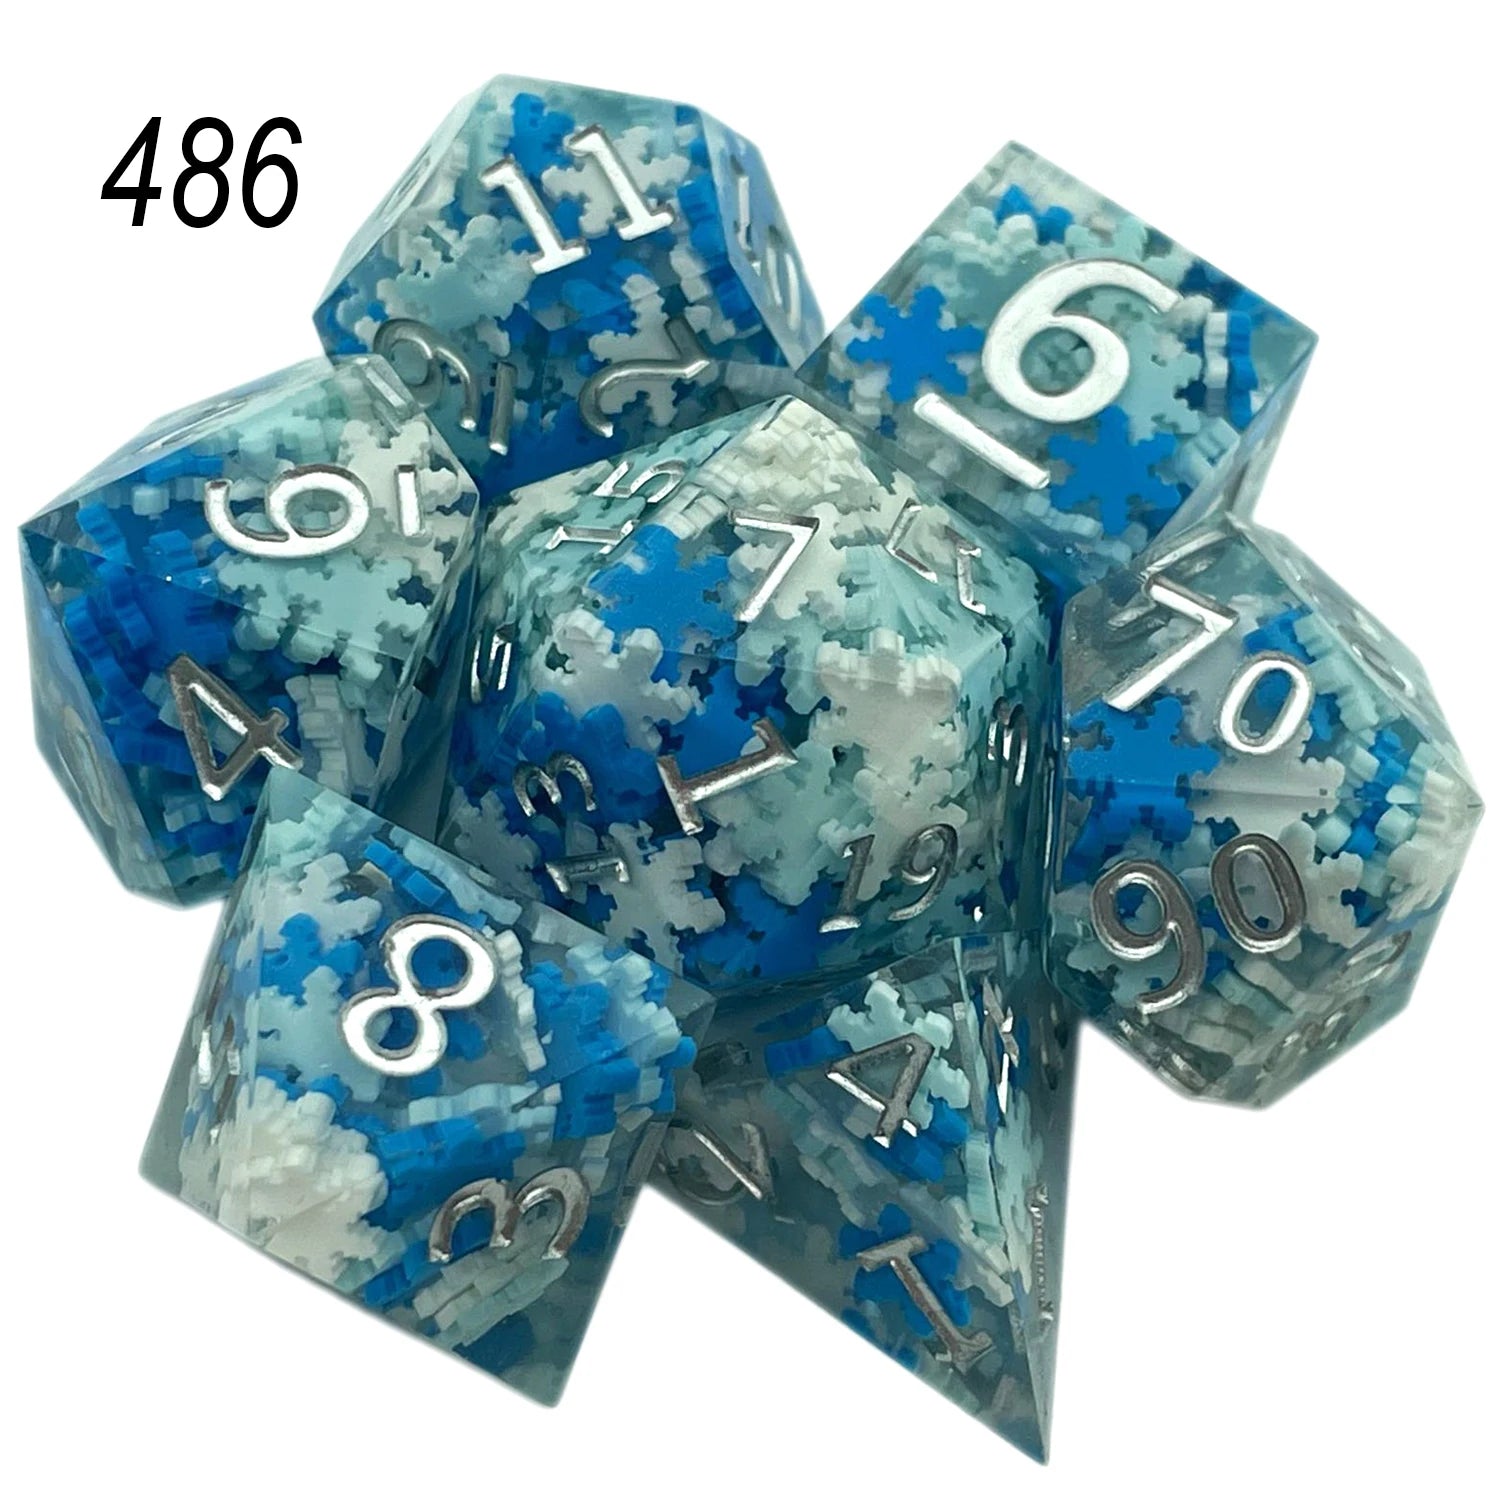 Solid Polyhedral Dice for Role Playing, Resin Dice, Dragon Scale, D, Rpg, Rol, Pathfinder, Board Game, Gifts, 7PCs, 2023 486